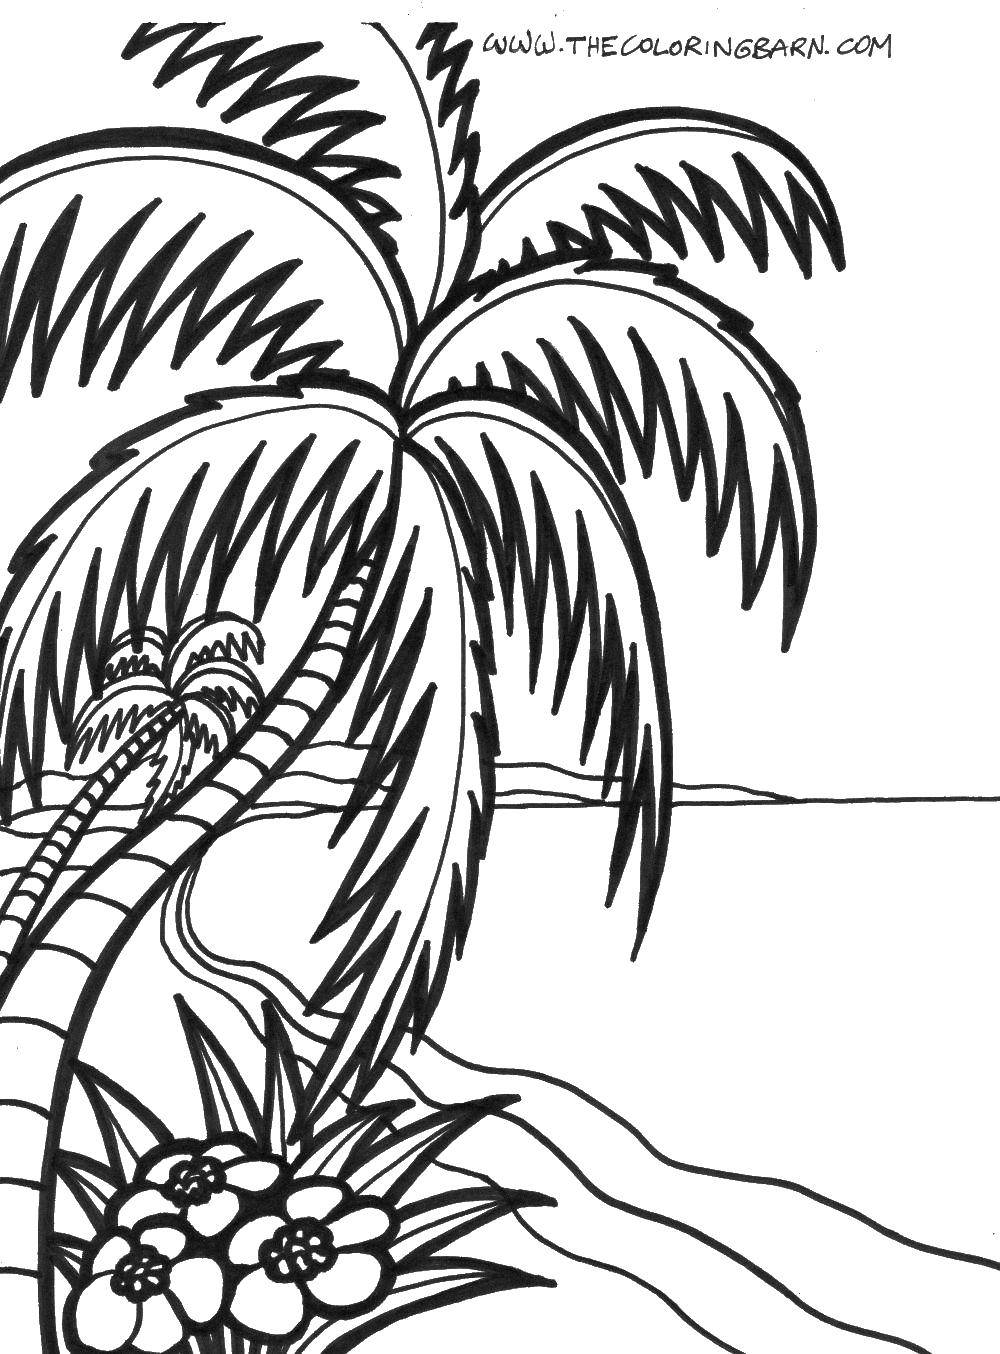 Coloring Palm trees over the sea. Category Beach. Tags:  beach, sea, palm trees.